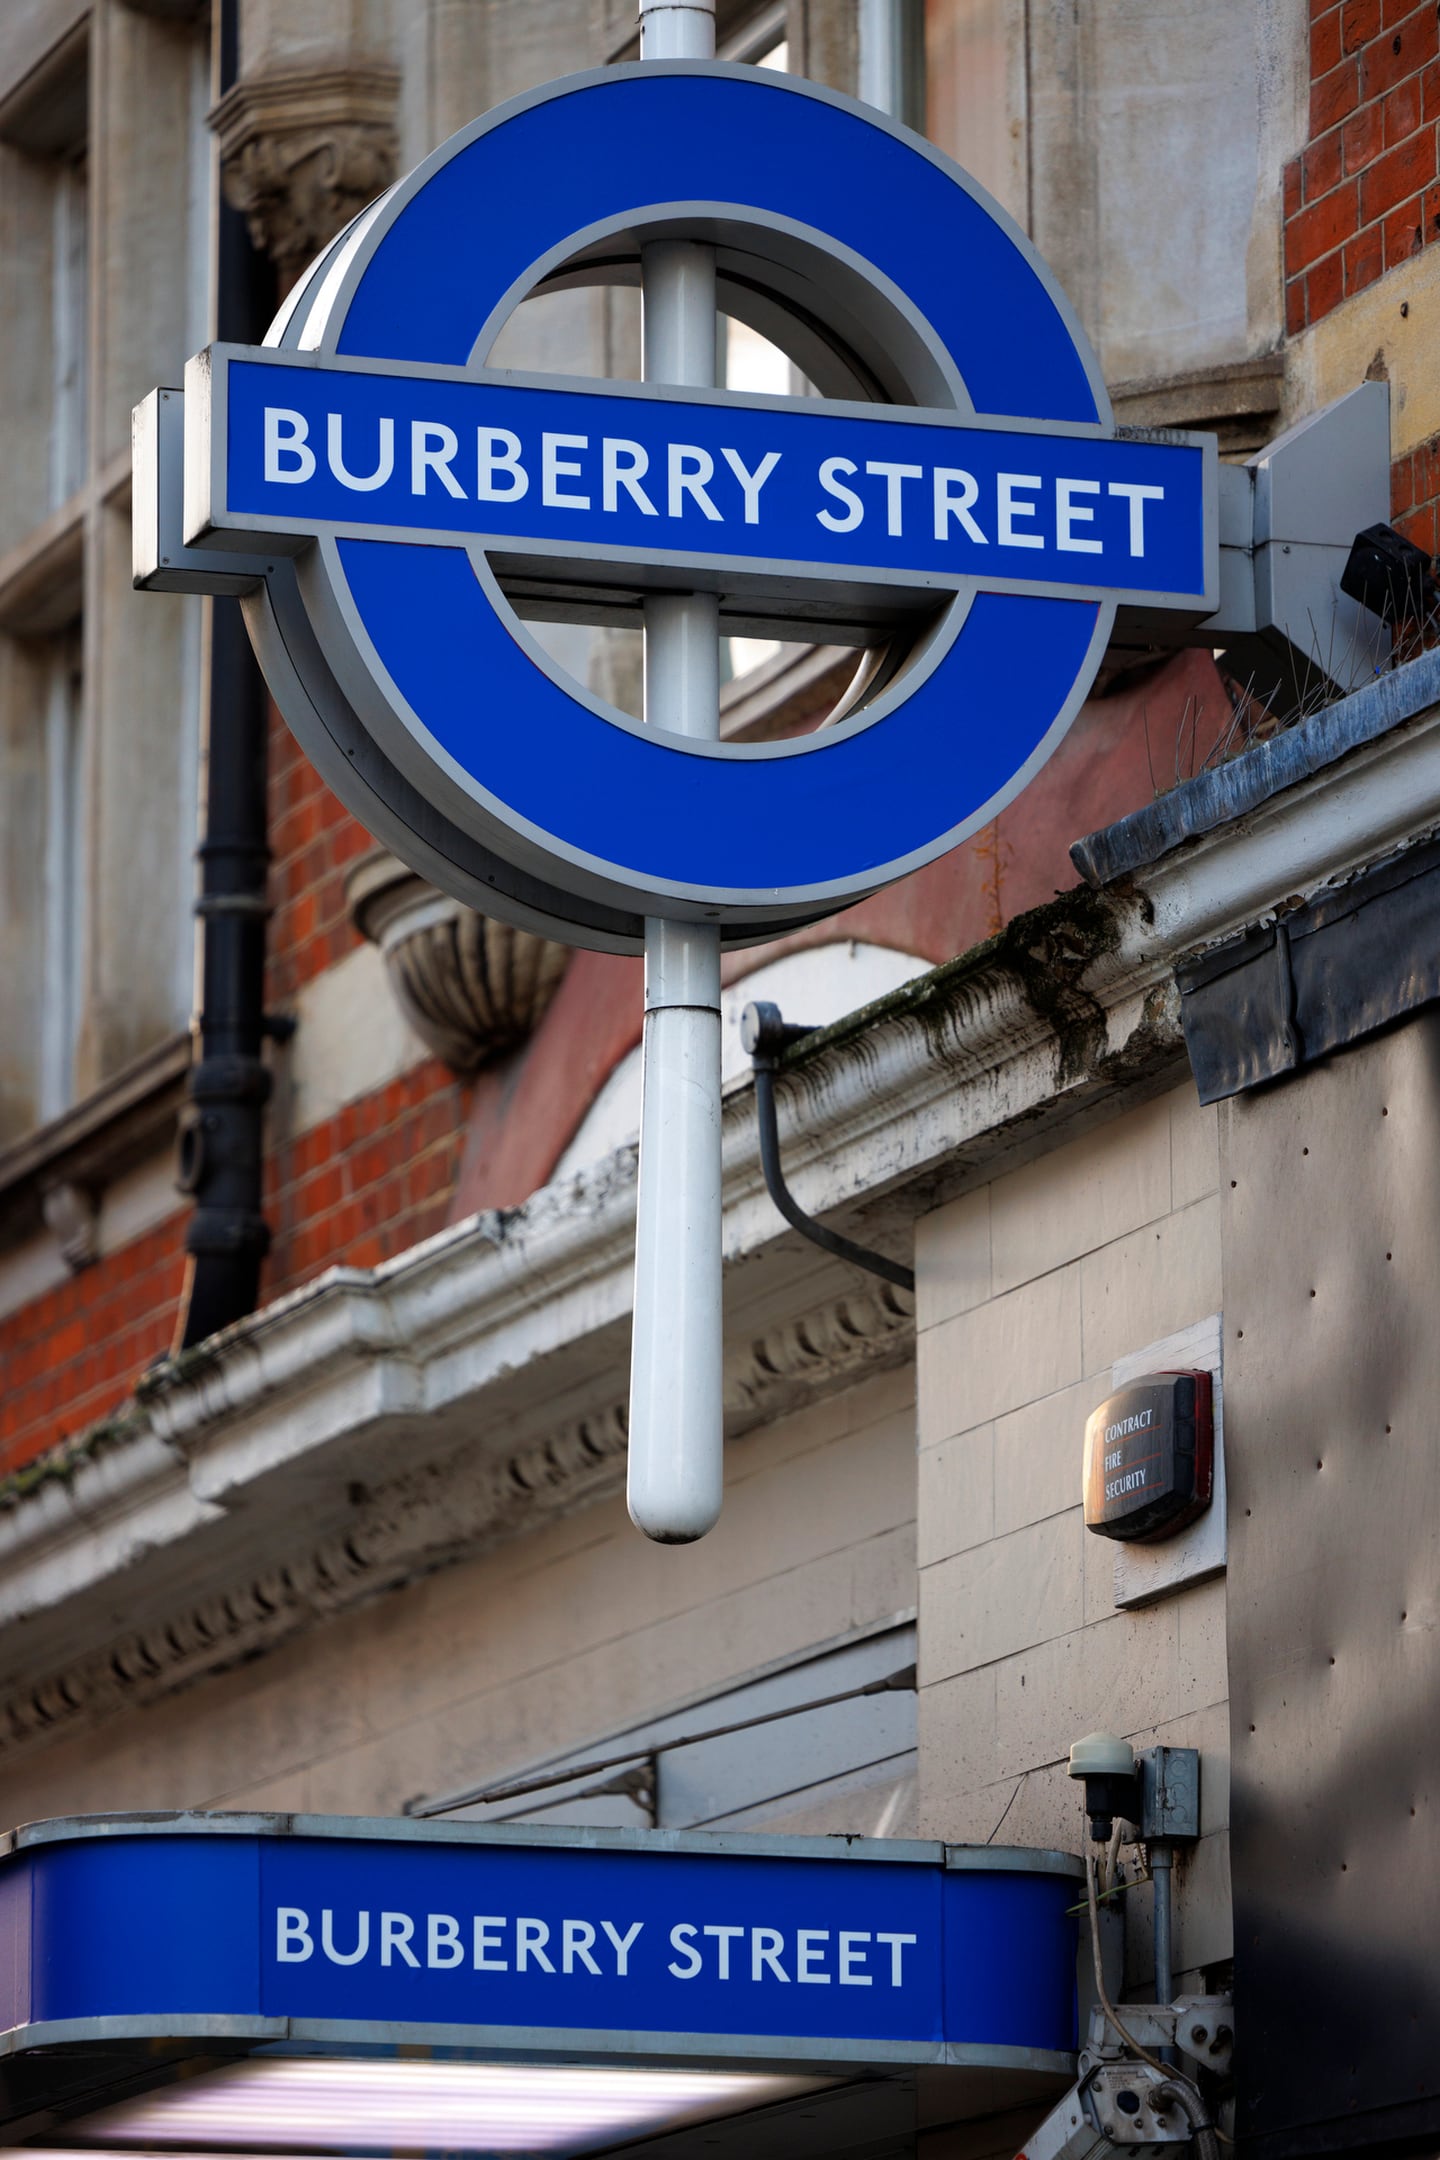 As part of Burberry Streets, London's Bond Street tube station was renamed "Burberry Street" for London Fashion Week in September 2023.